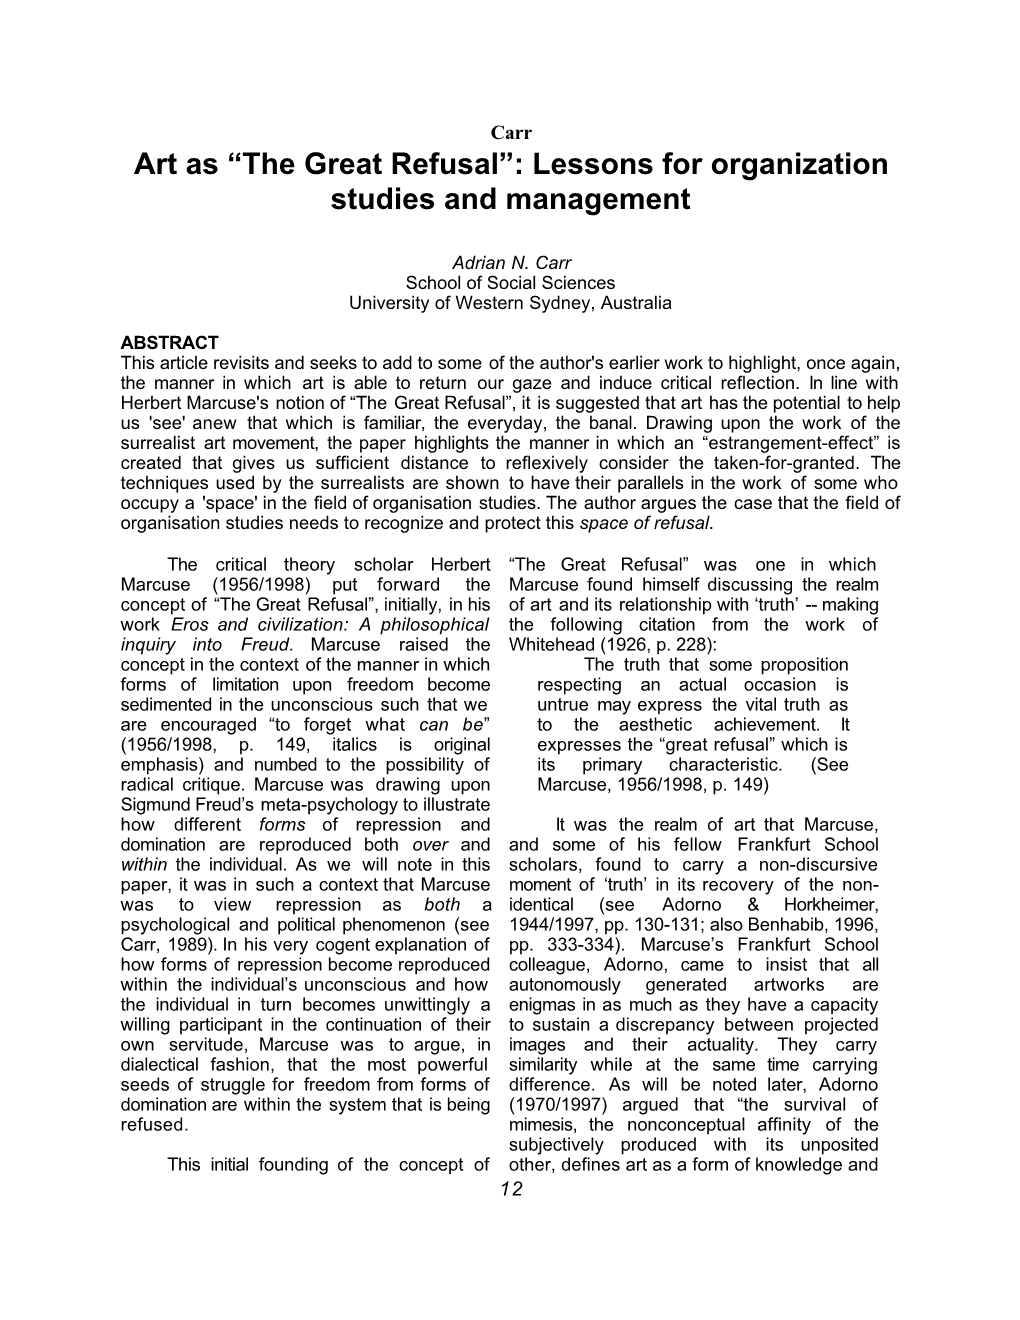 Art As “The Great Refusal”: Lessons for Organization Studies and Management